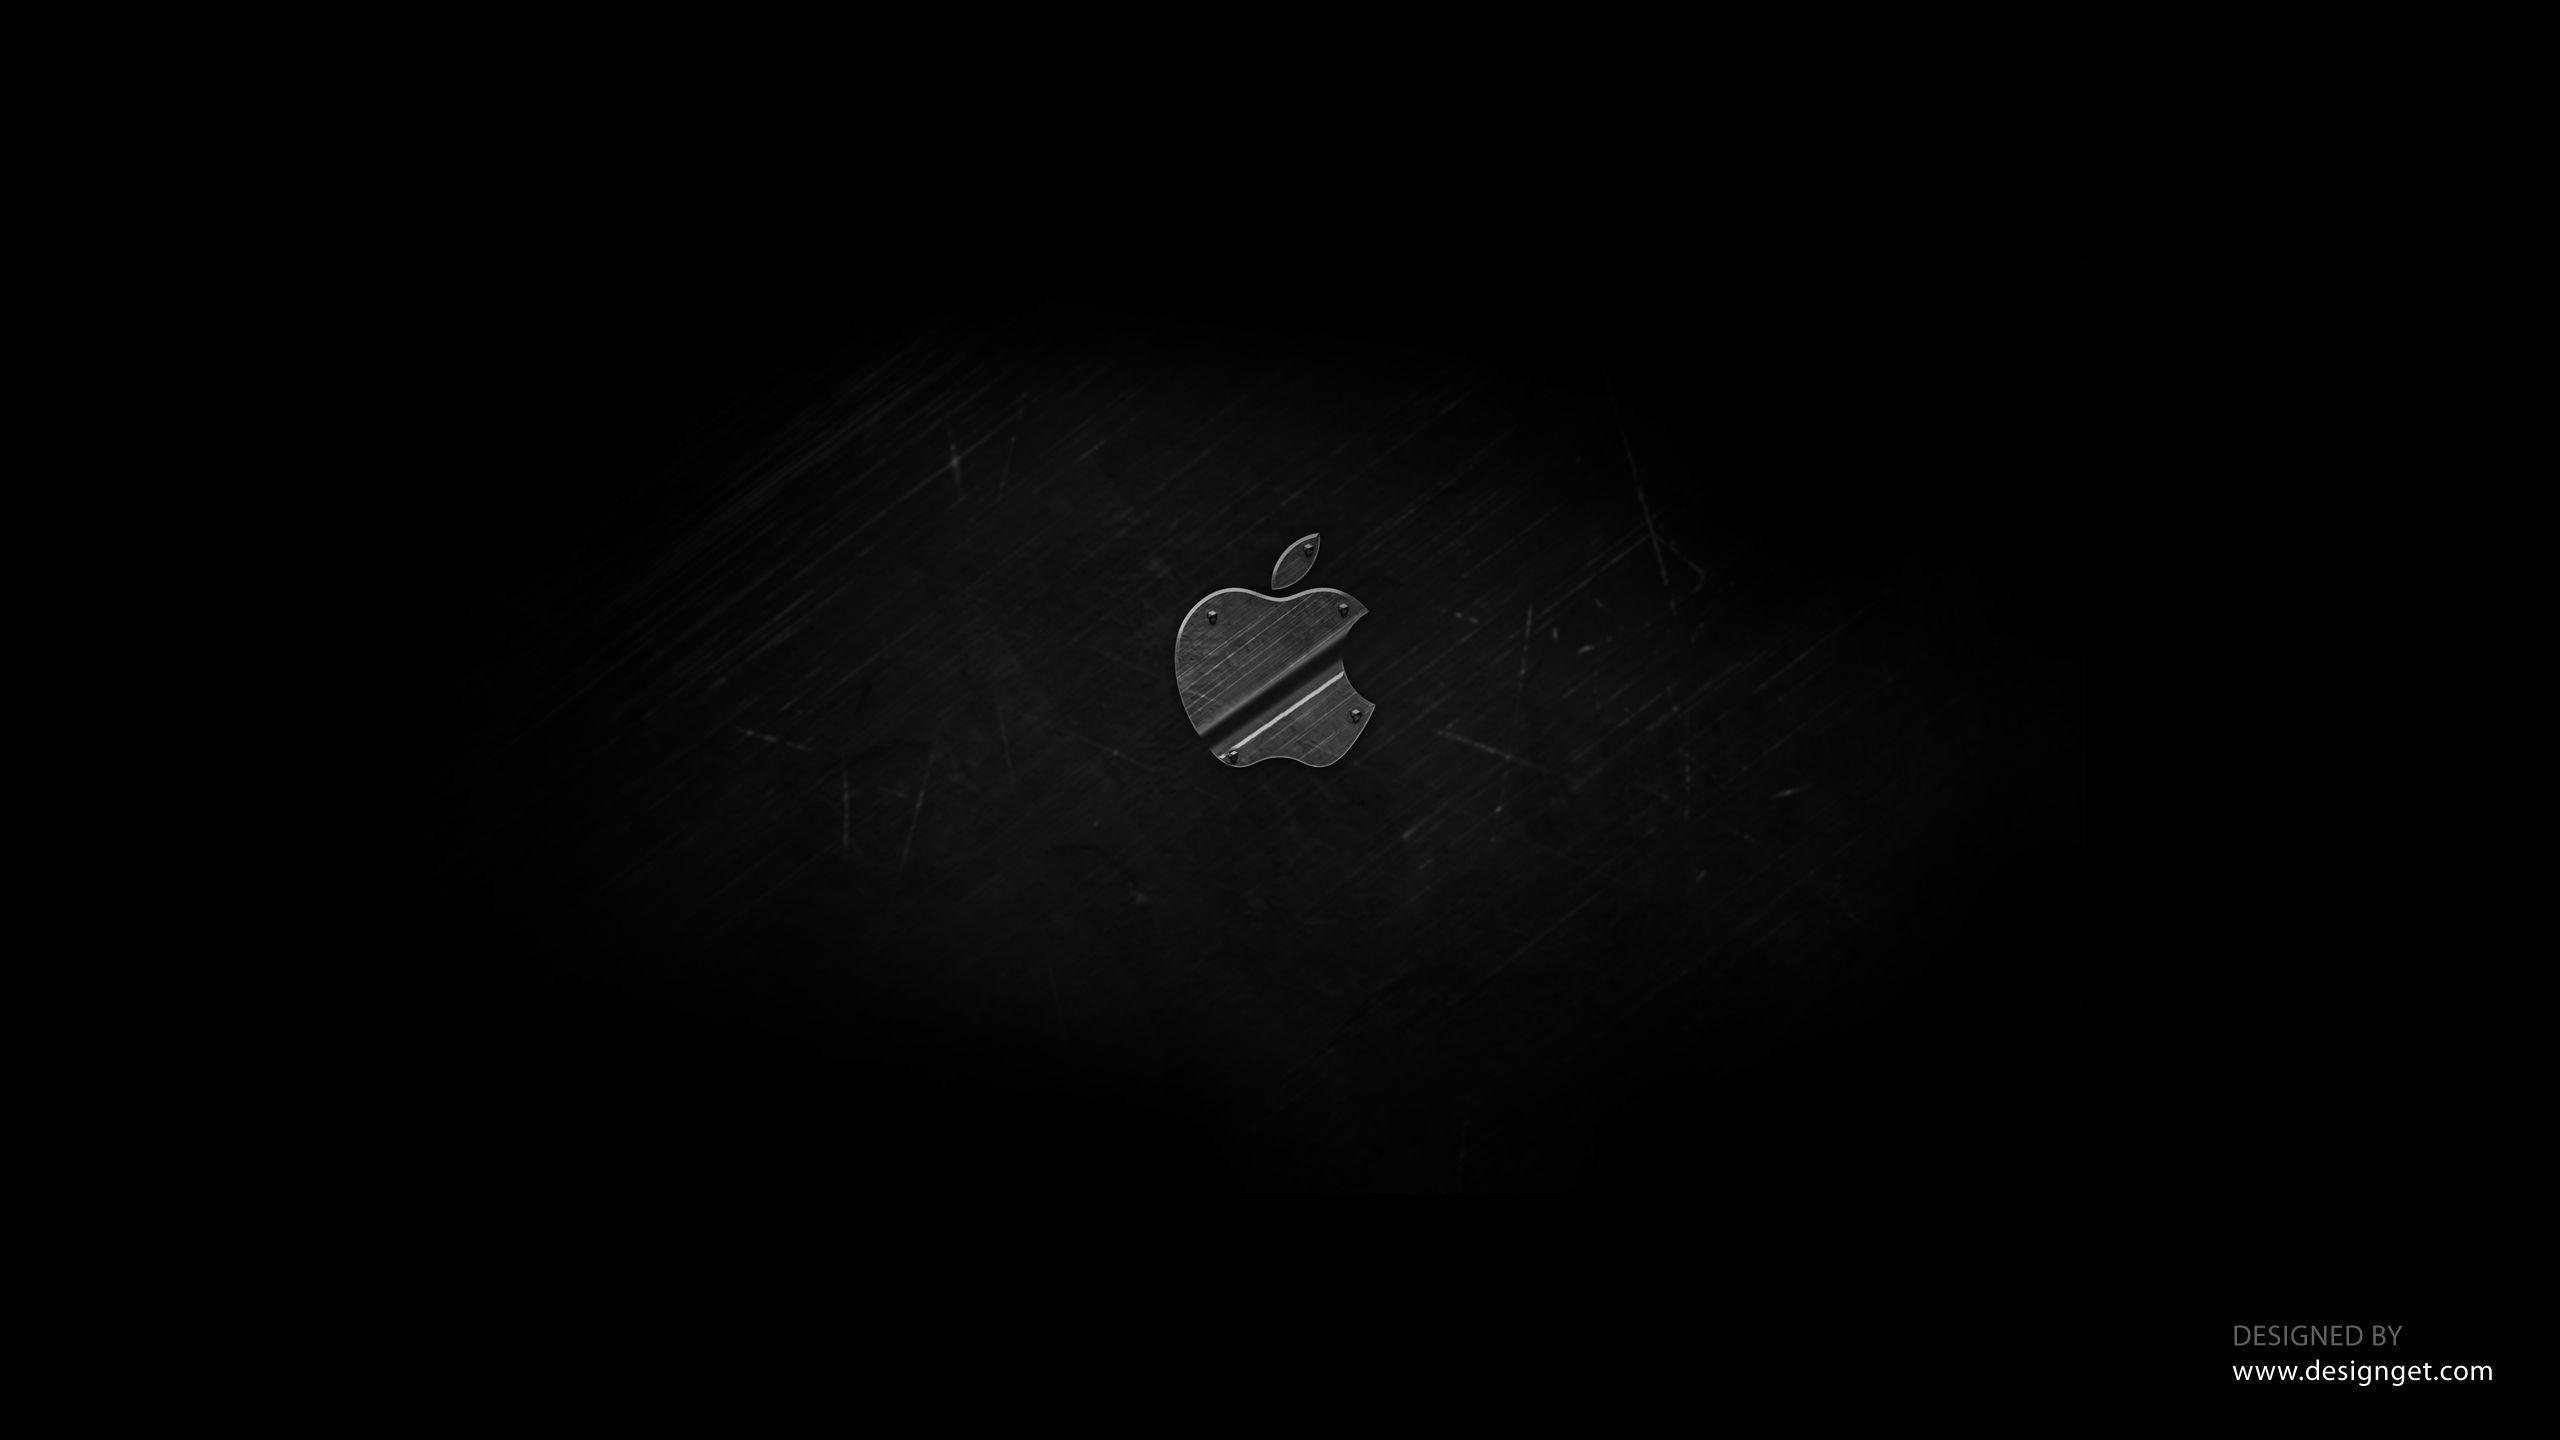 imac 27 wallpaper 10 - Image And Wallpaper free to download